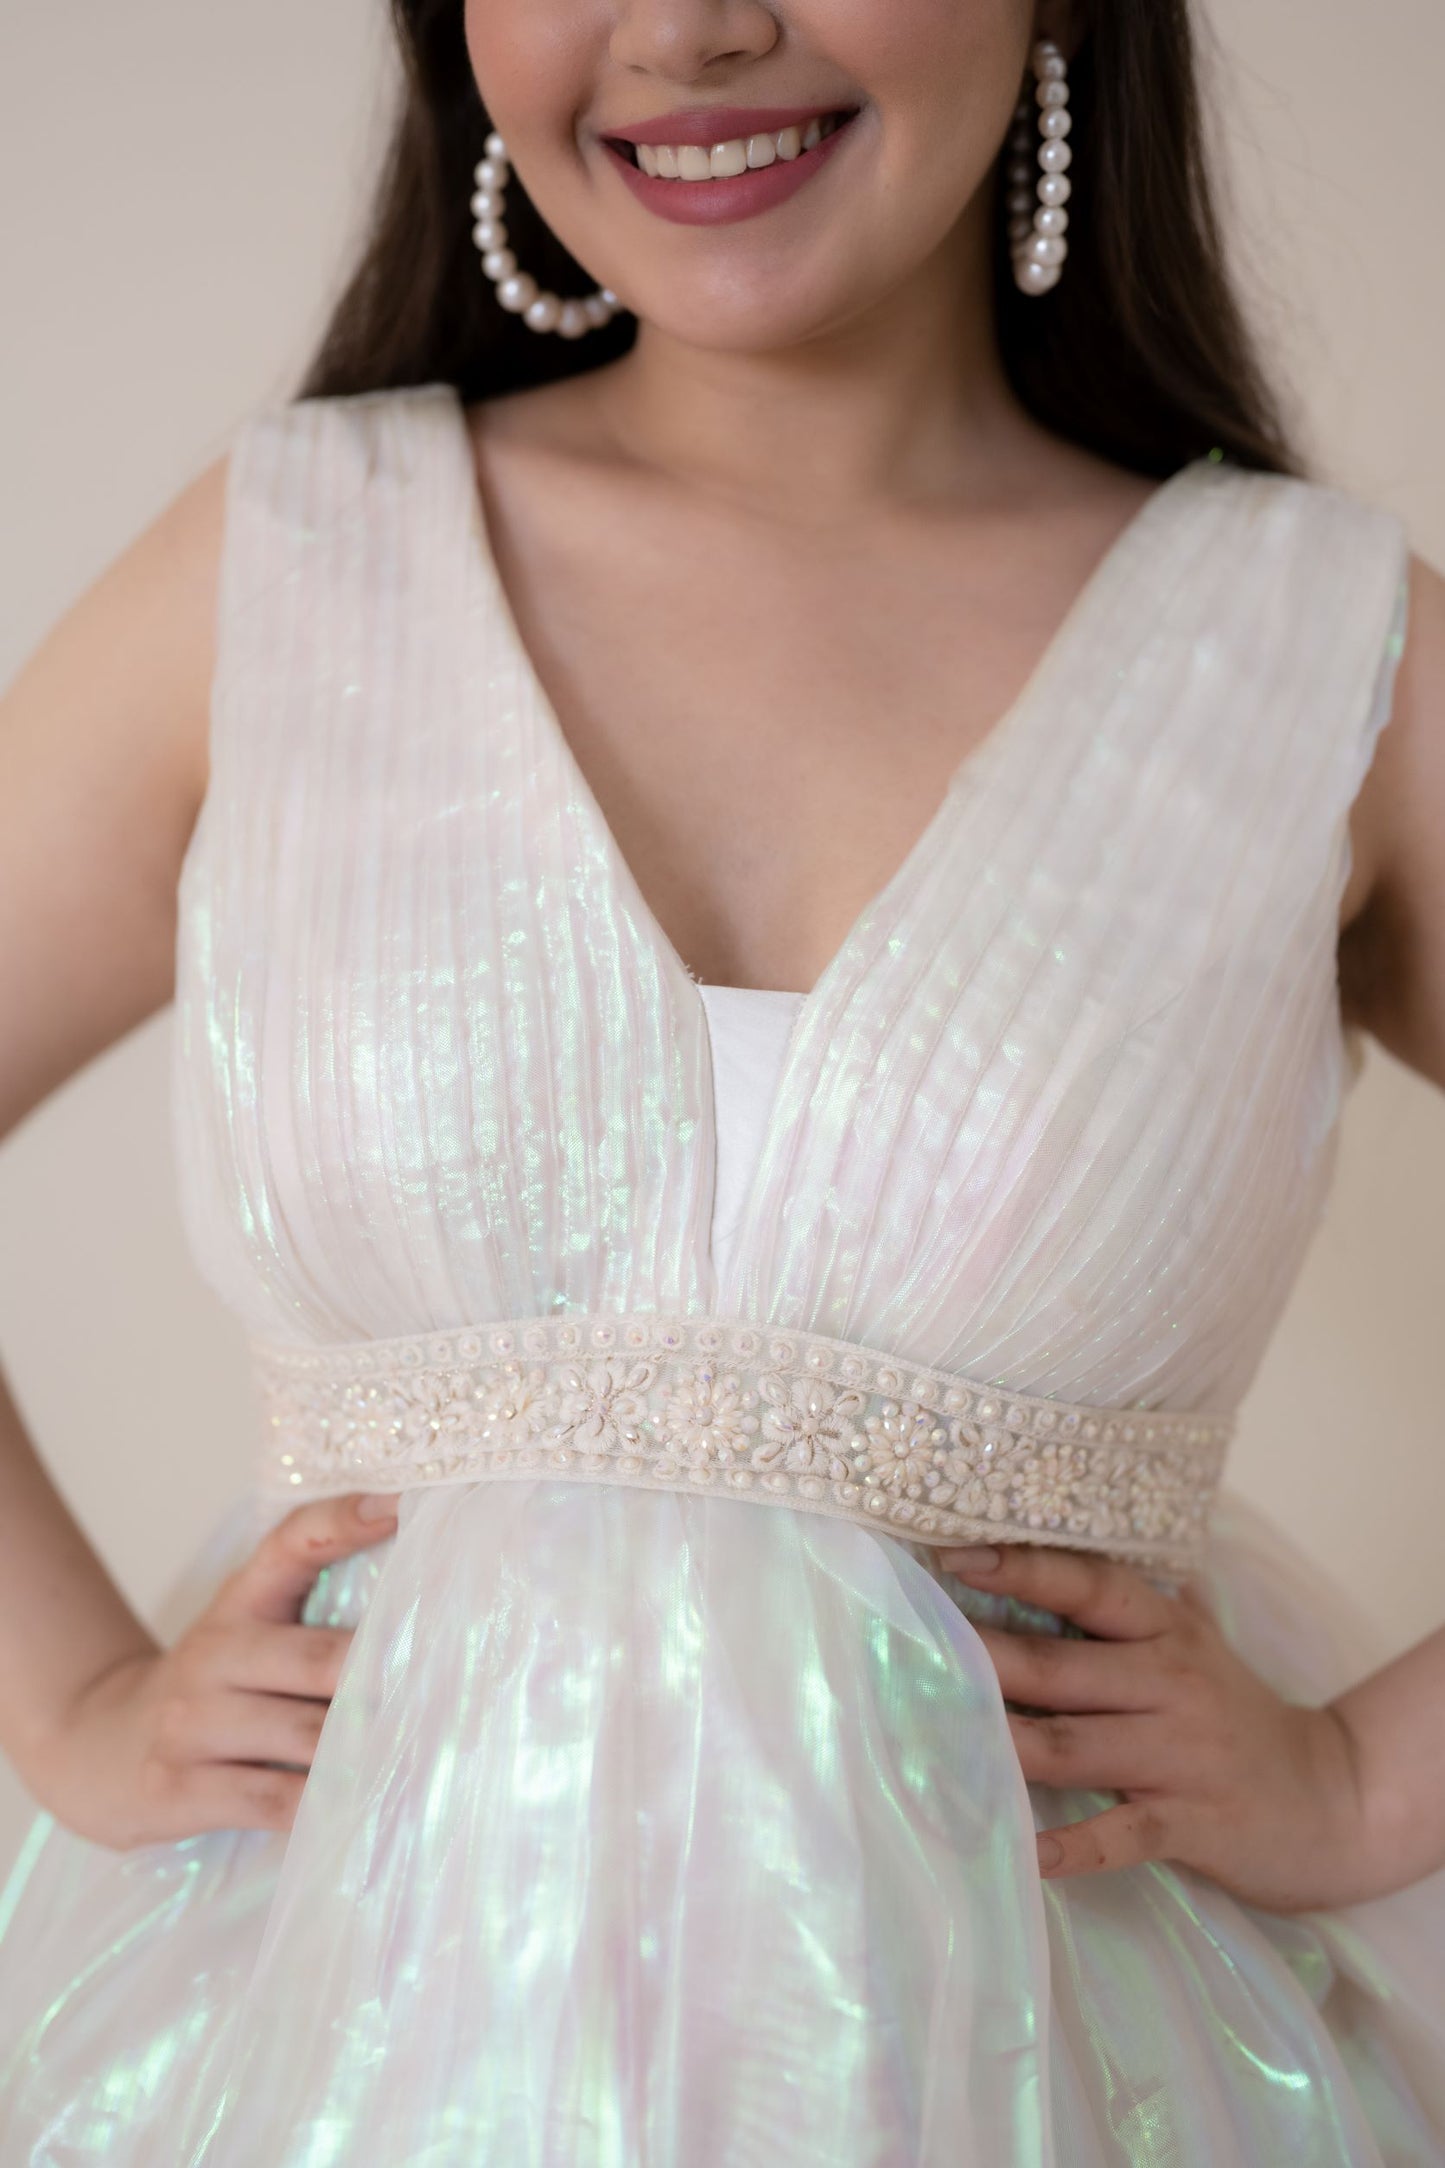 This dress is beautifully sewed with Iridescent Organza Fabric with a unique embellished belt. When worn, you sure would be the only diva in the room!